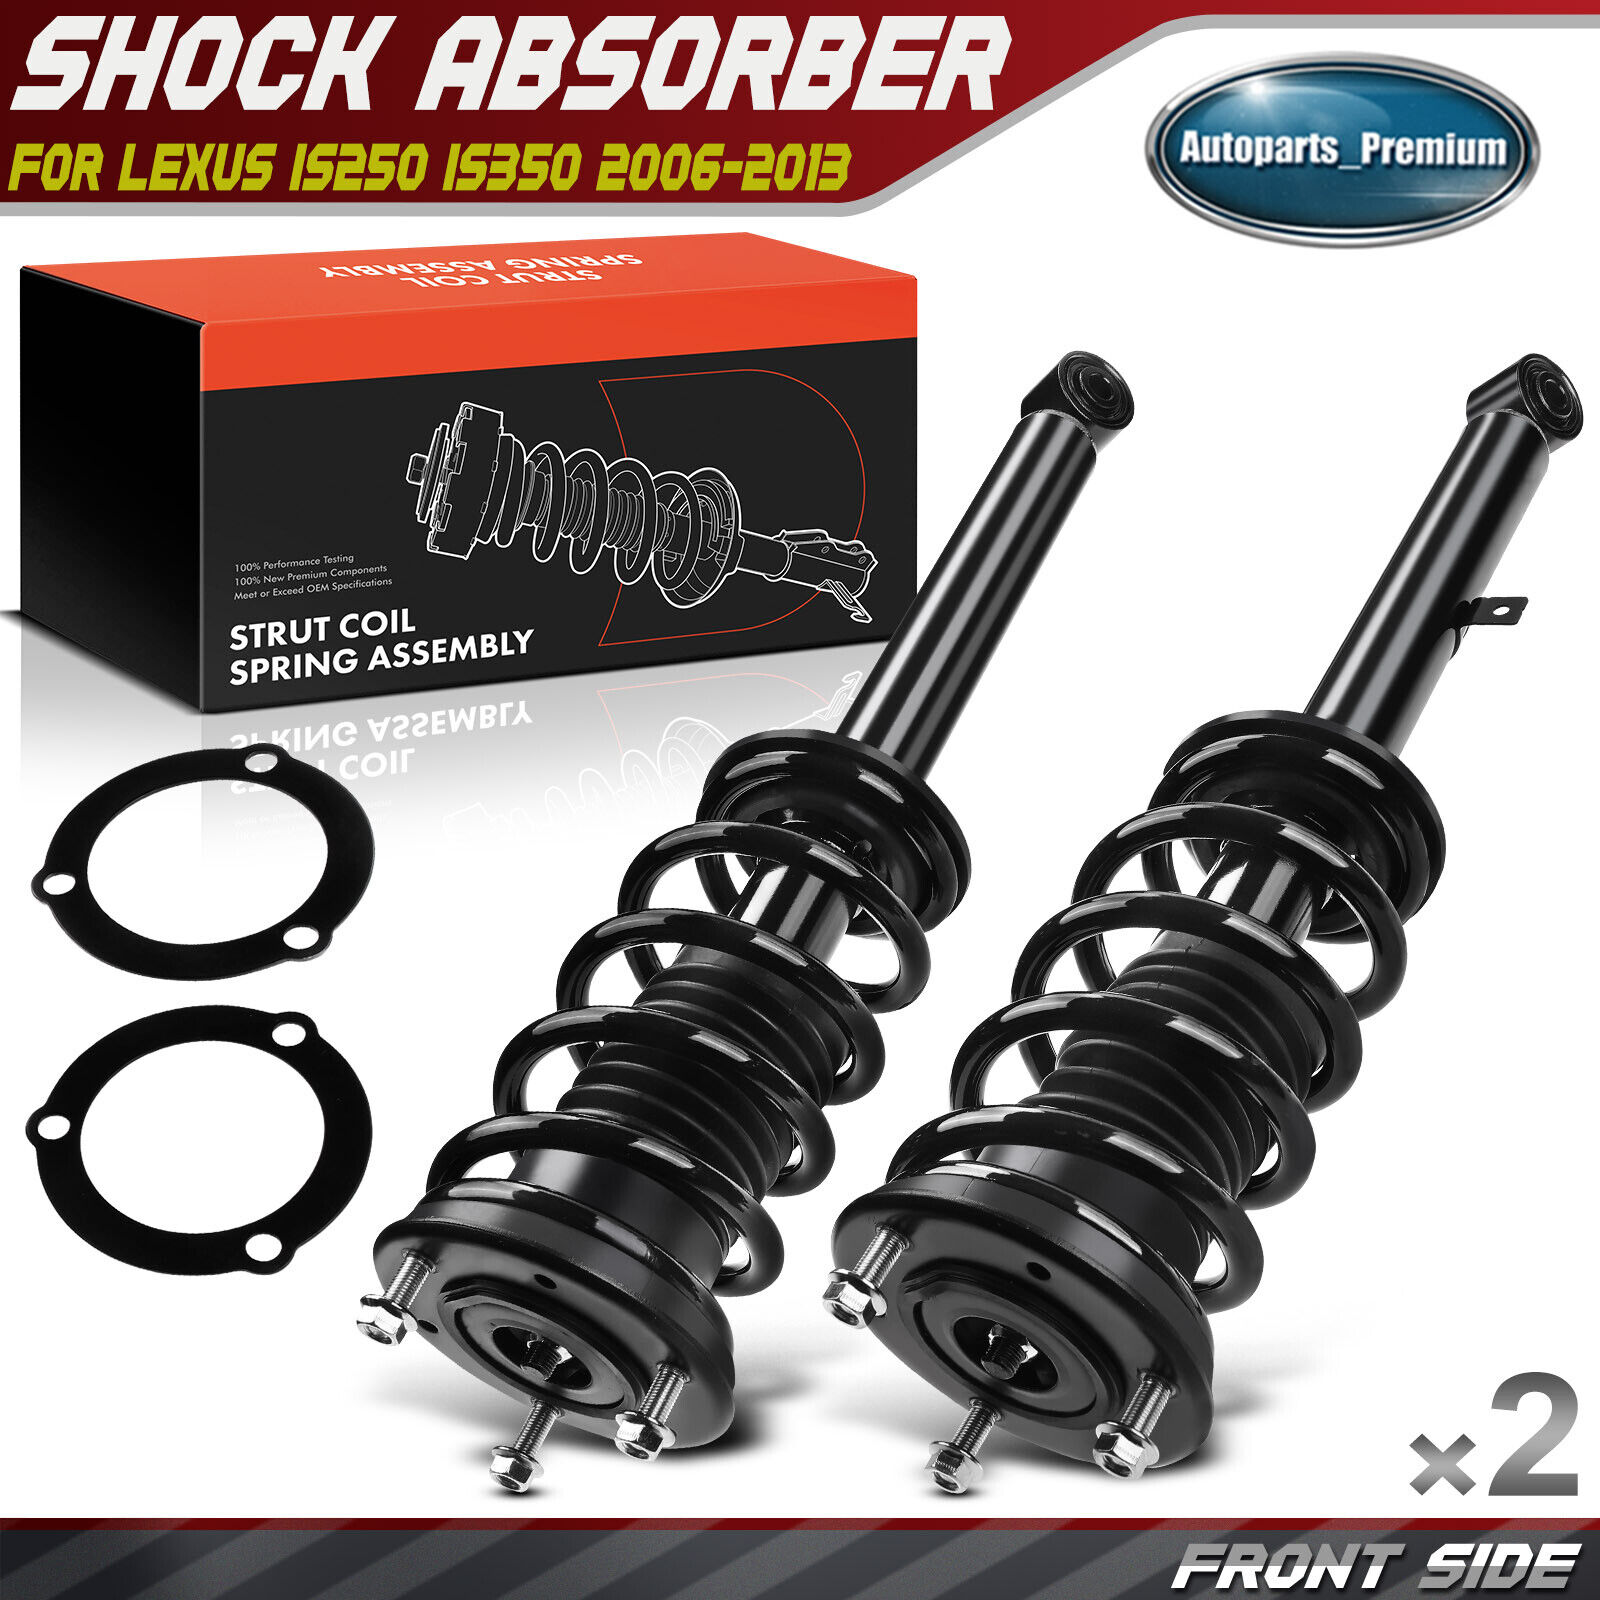 2x Complete Strut & Coil Spring Assembly for Lexus IS250 IS350 06-13 RWD Front